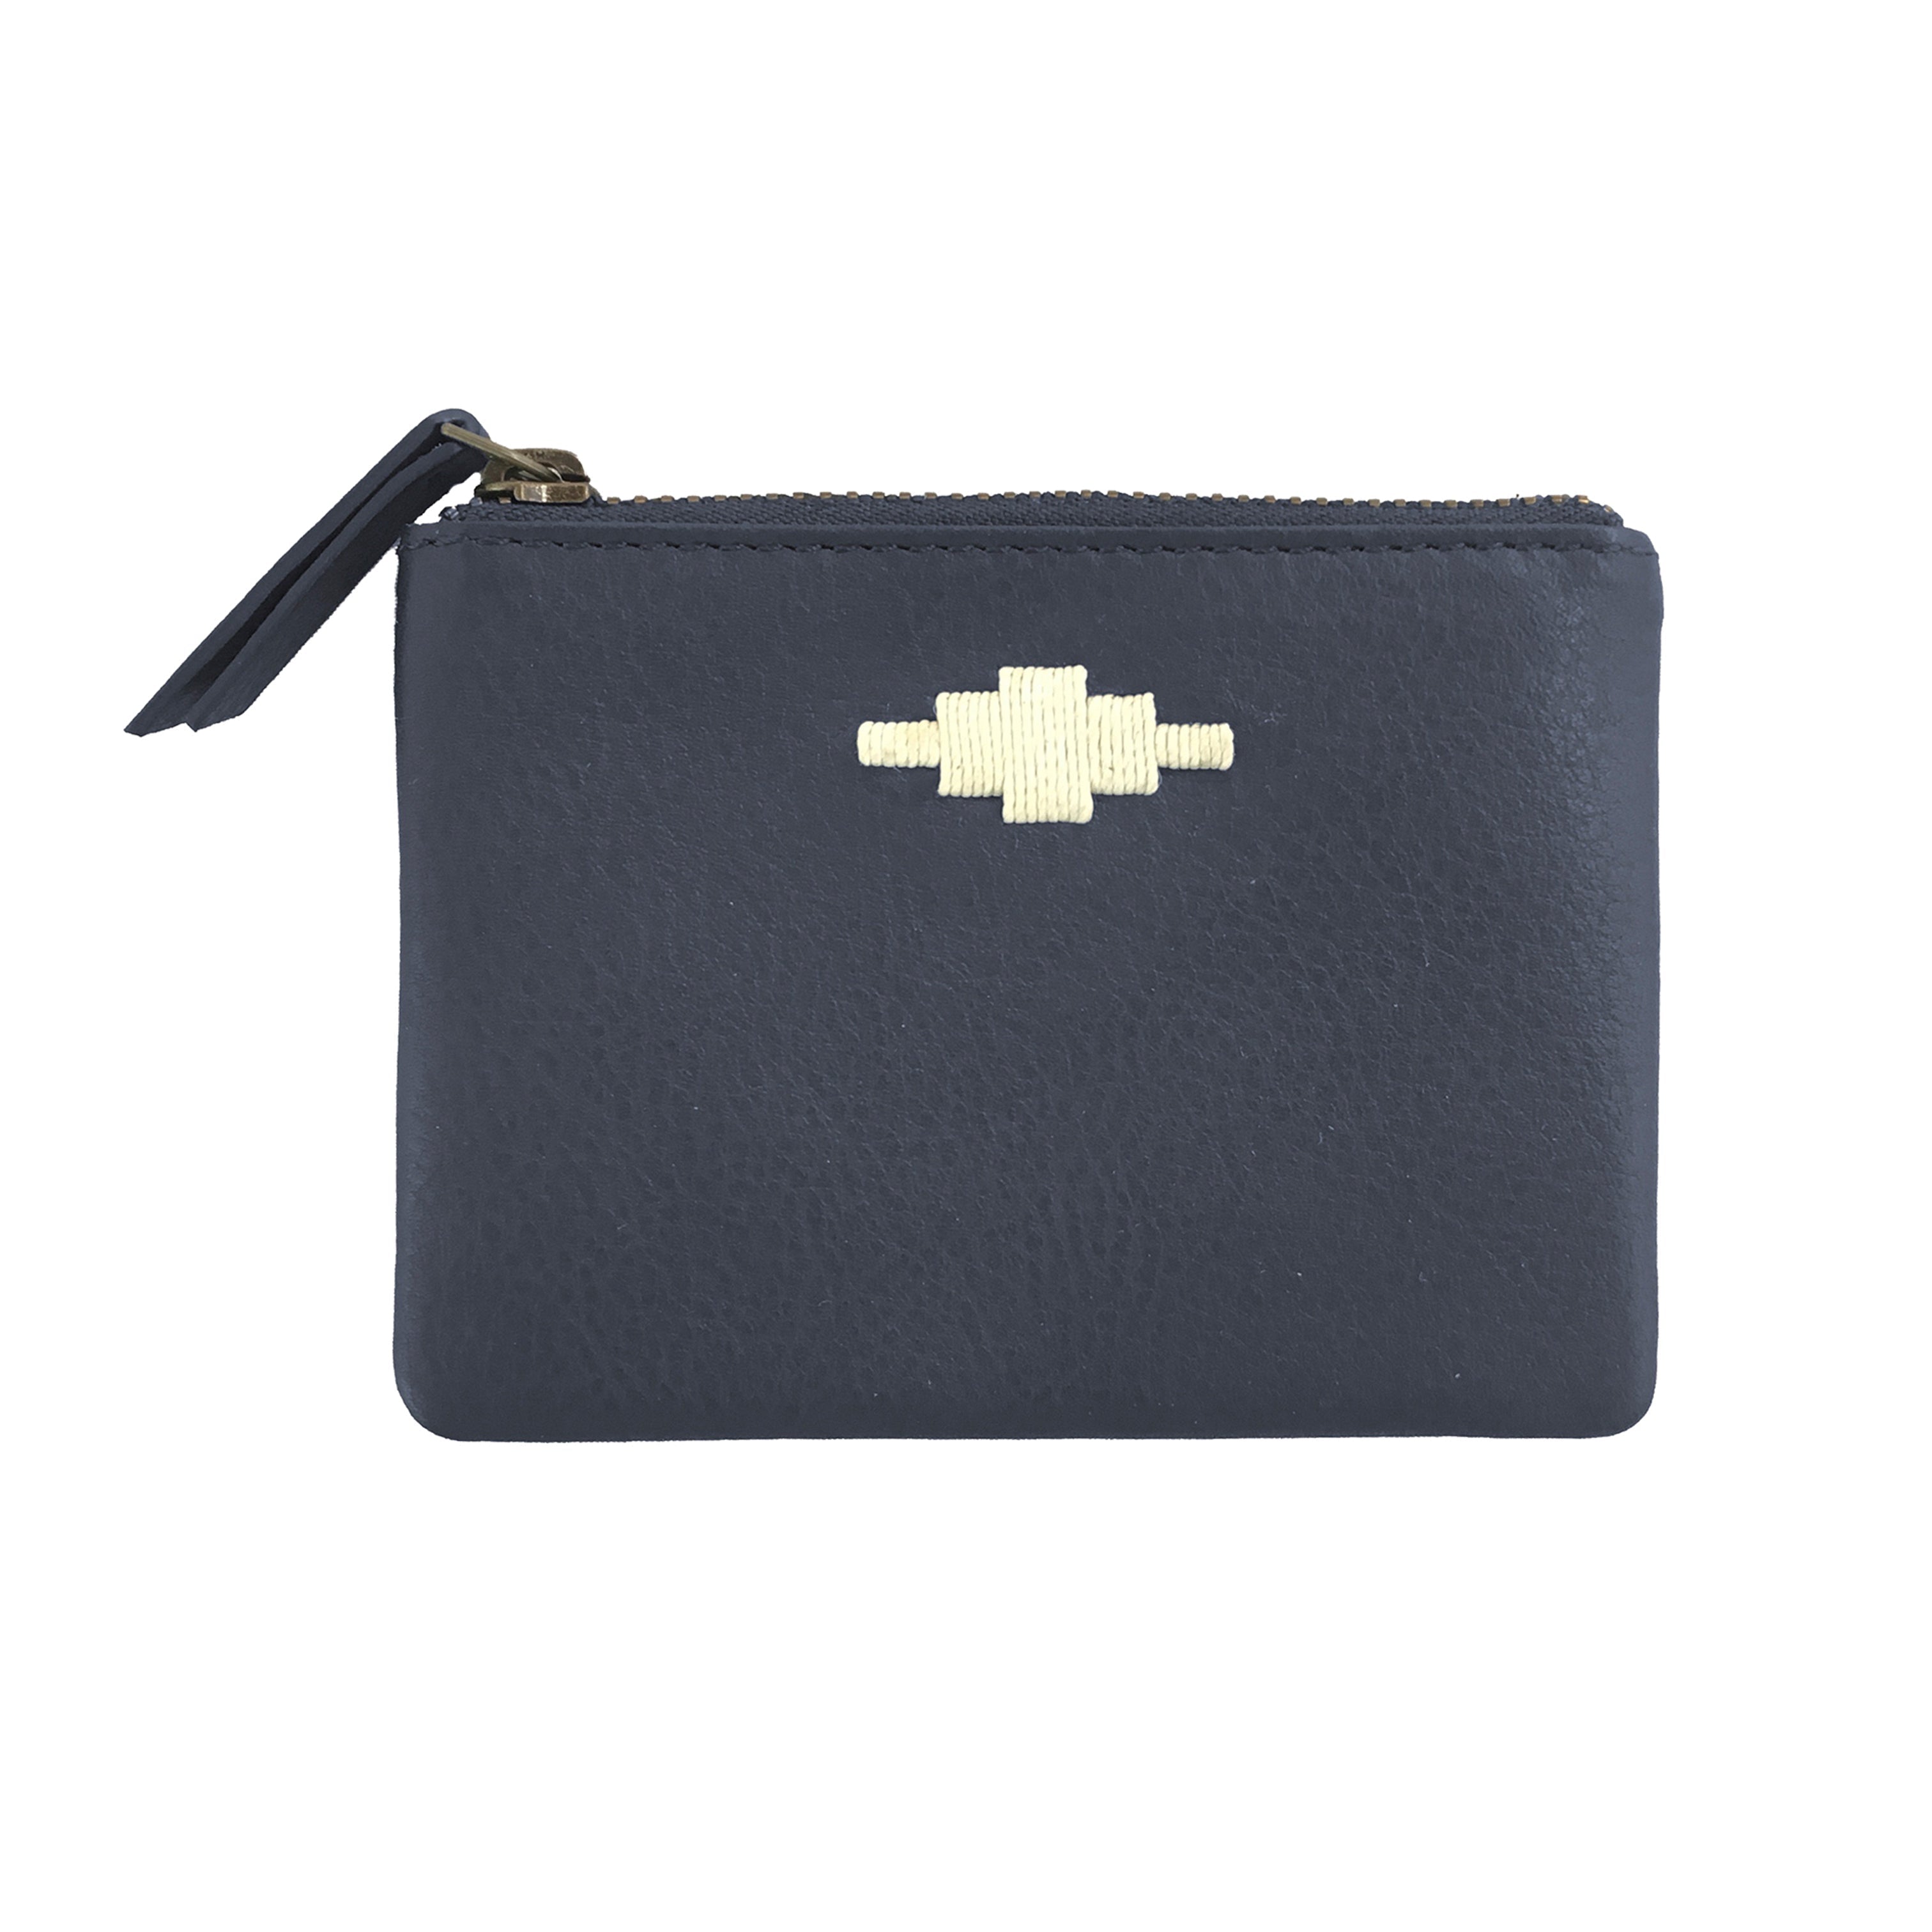 PAMPEANO - Cambio Pouch Purse - Navy Leather